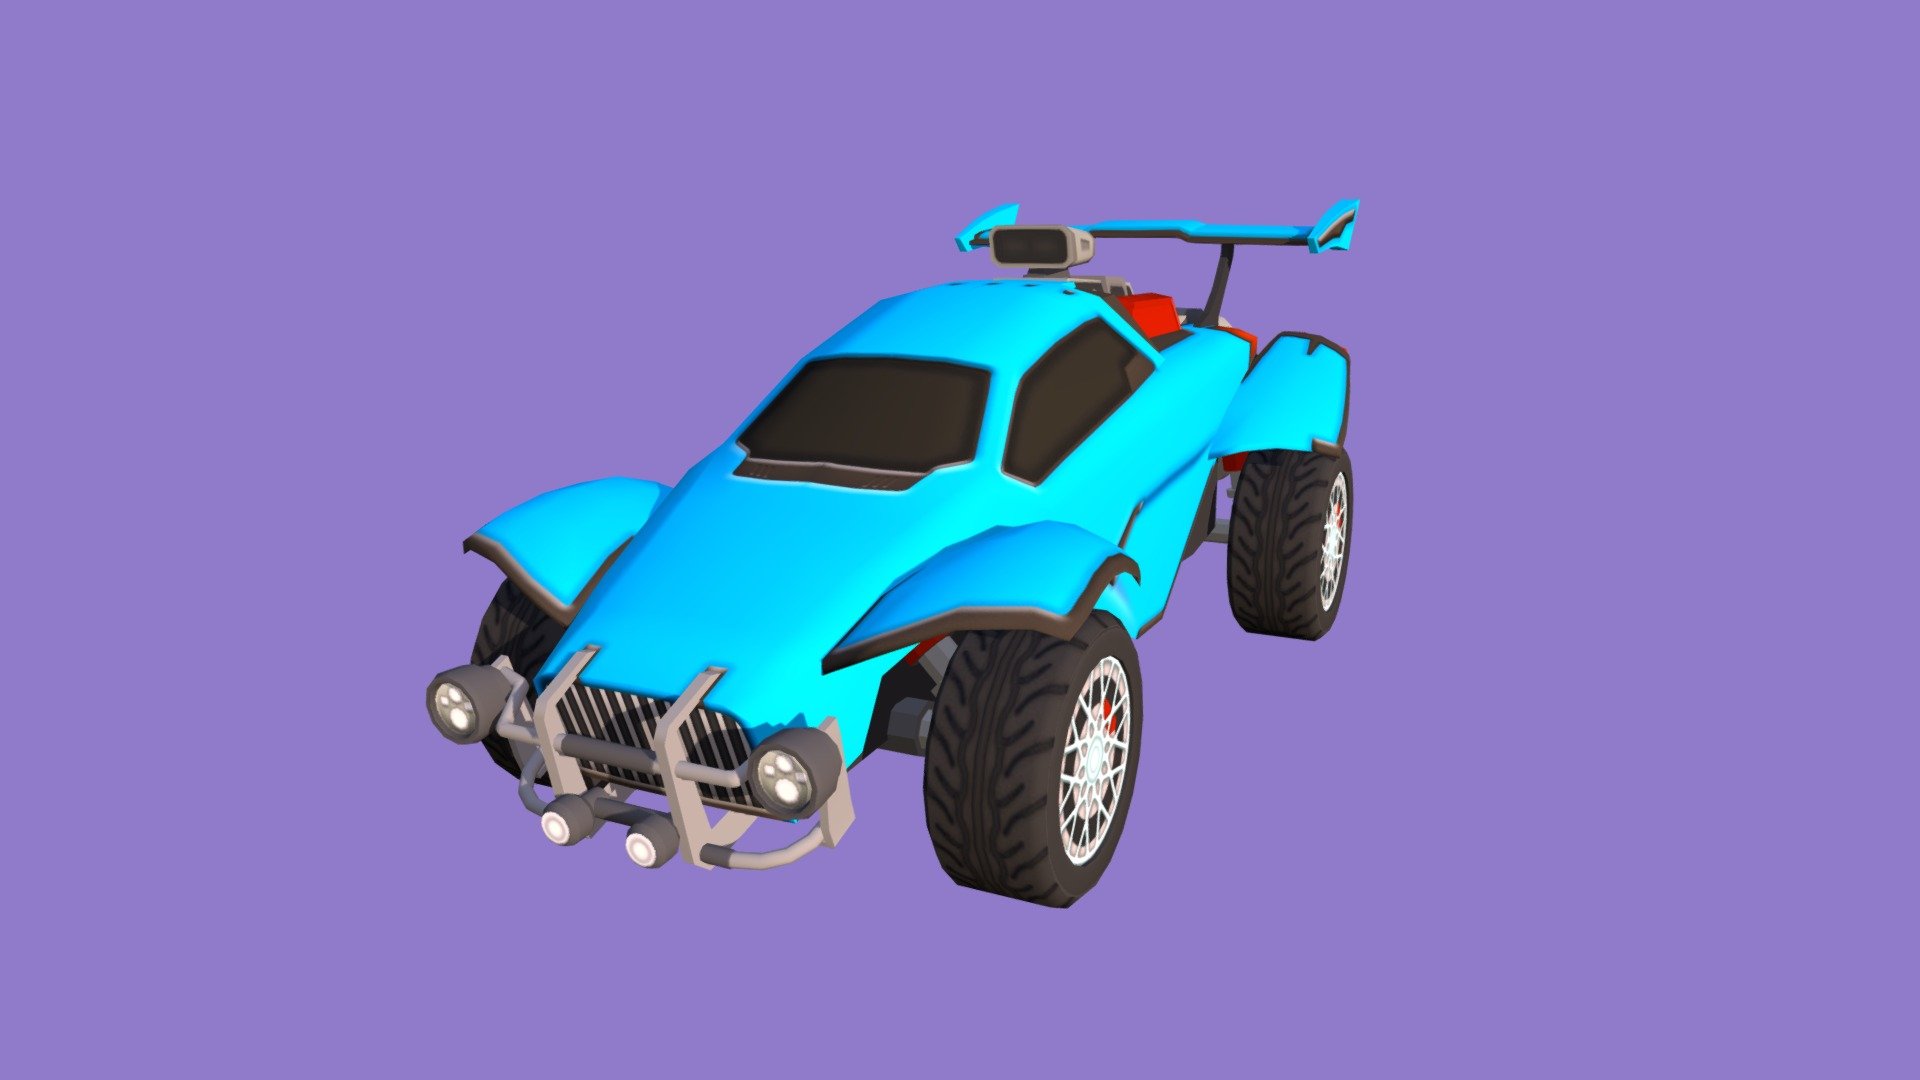 Low-poly Octane from the game Rocket League.
Created for use within a Snaplens 3d model